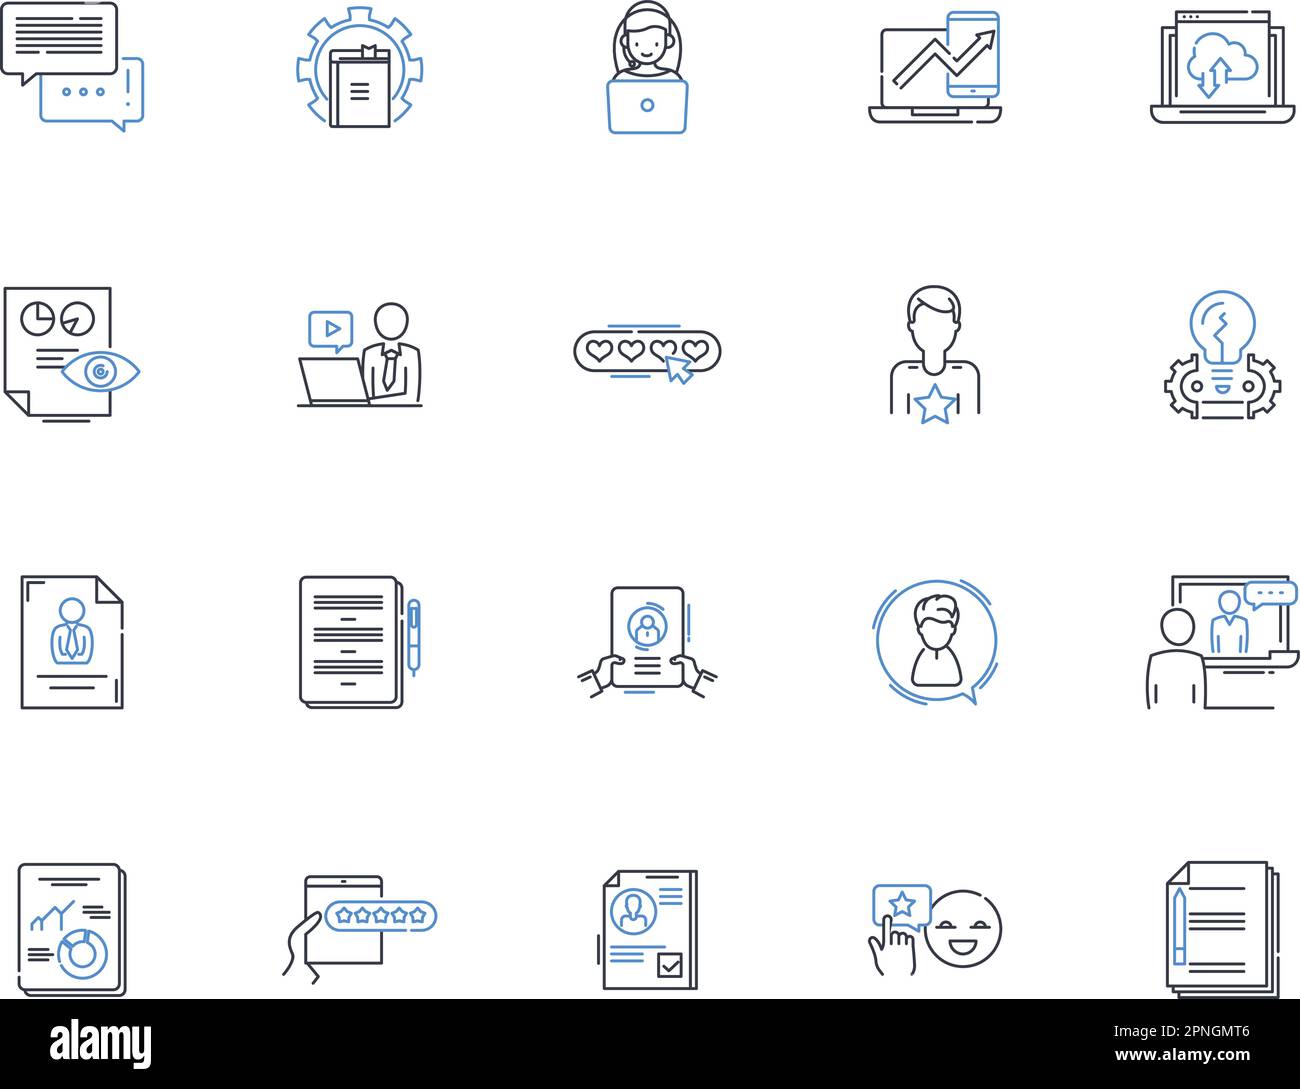 Opinion sharing line icons collection. Feedback, Thoughts, Perspectives, Viewpoints, Beliefs, Positions, Attitudes vector and linear illustration Stock Vector